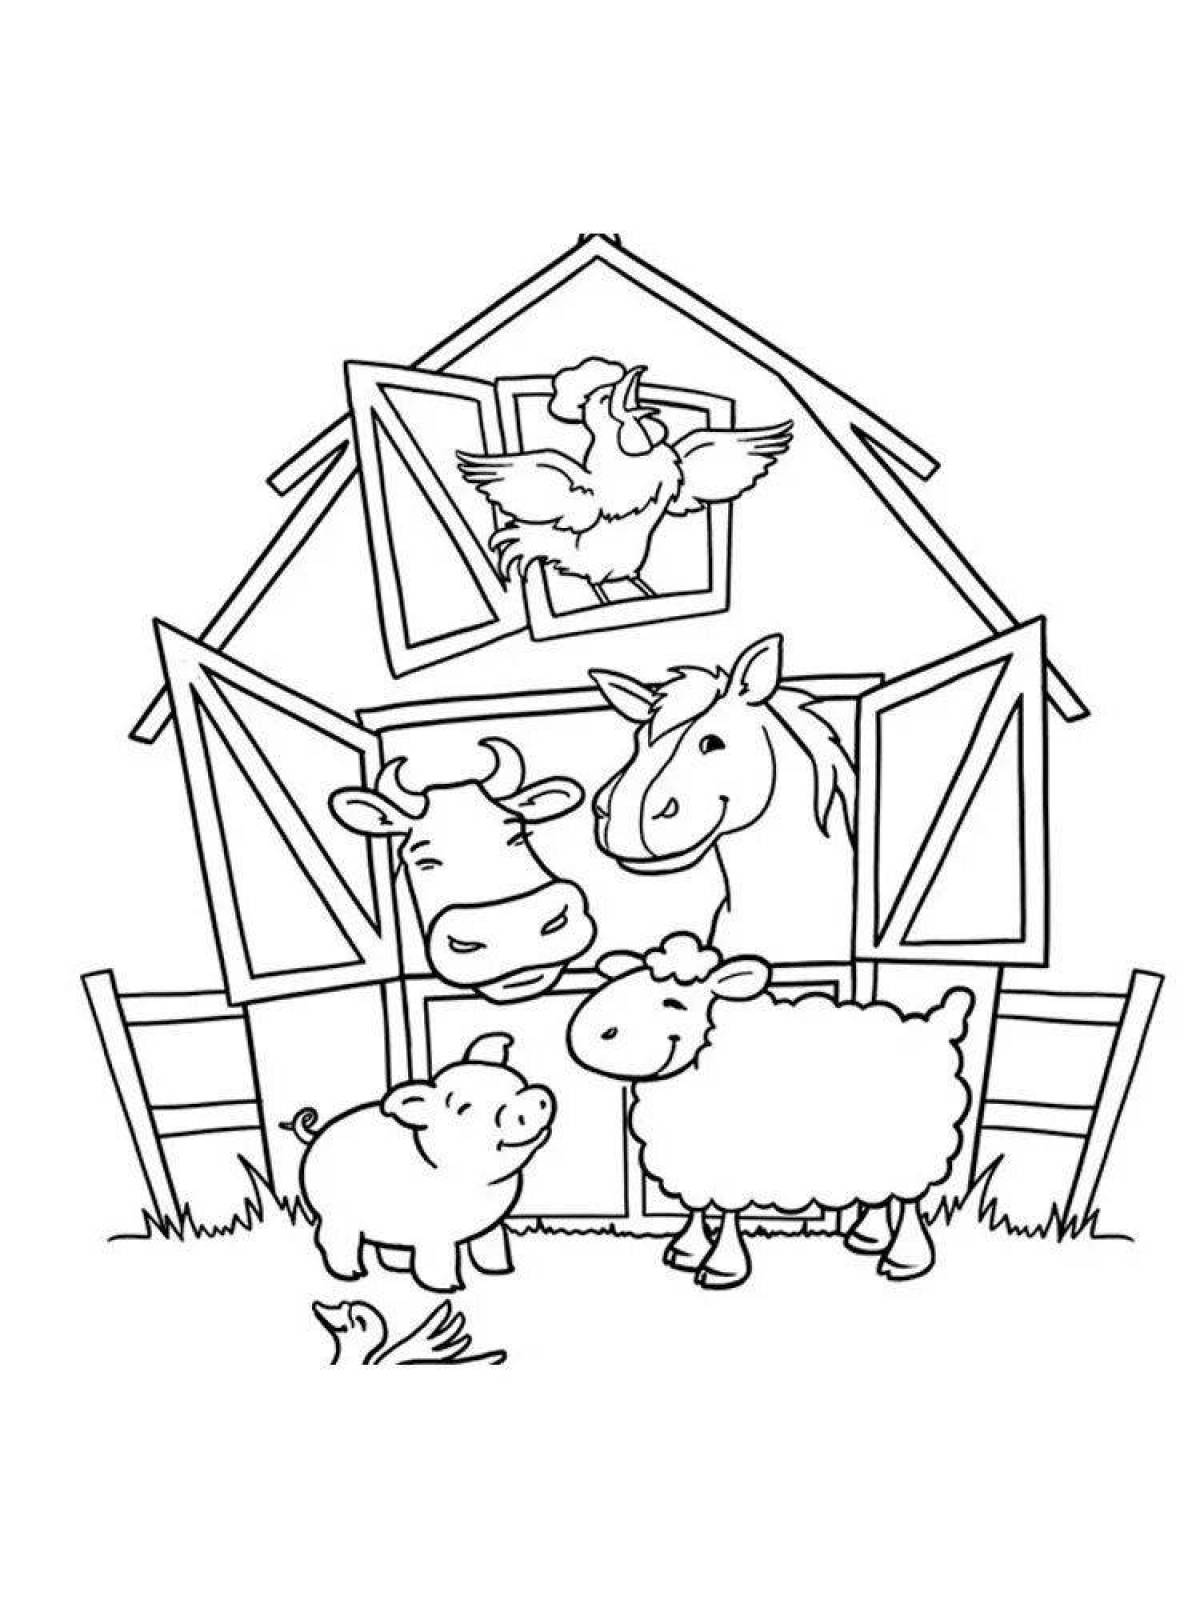 Shiny winter hut coloring book for kids